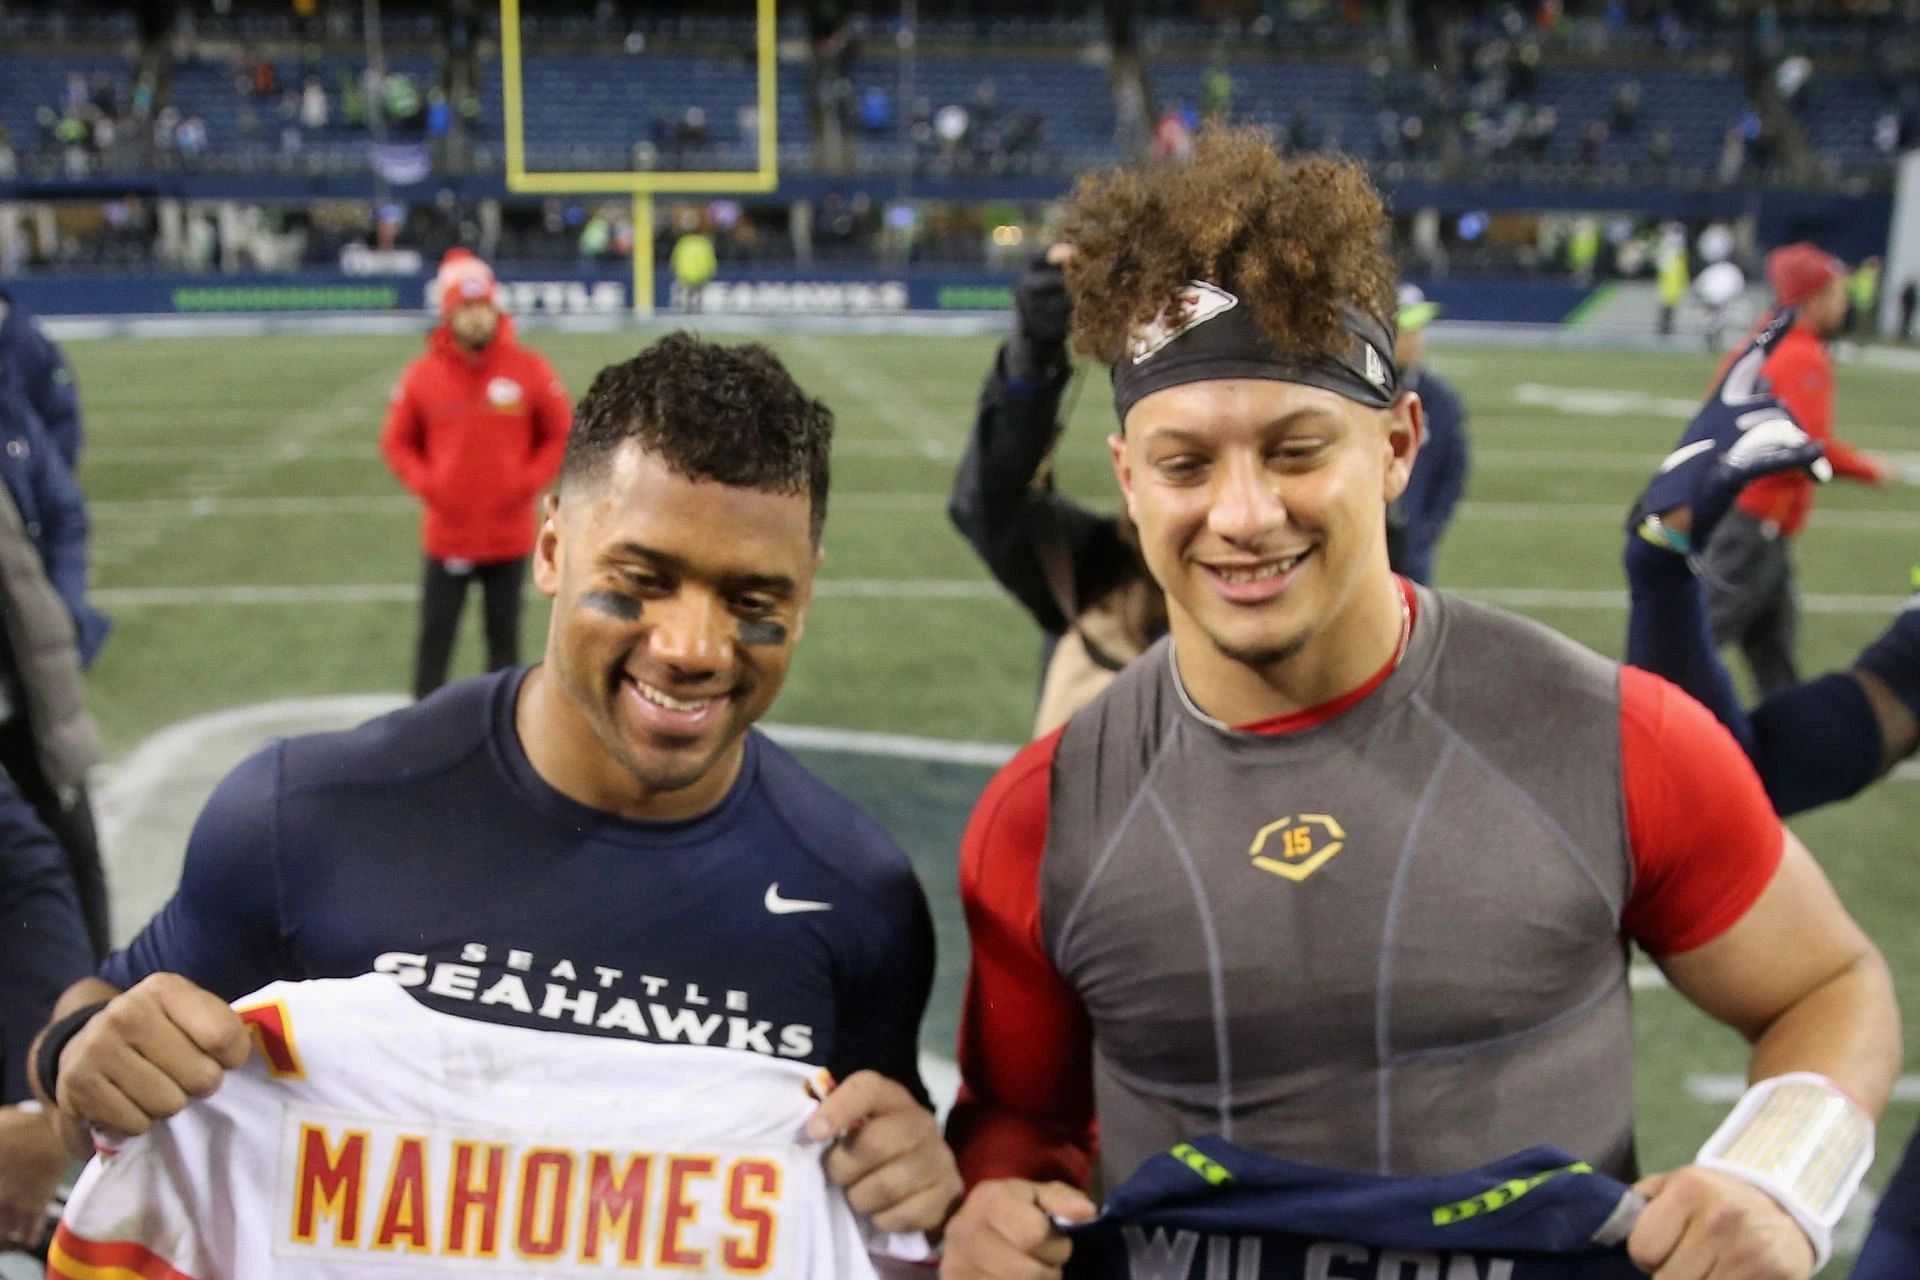 Russell Wilson to join Essentia Water? Broncos QB teases new endorsement with Patrick Mahomes promoted water brand